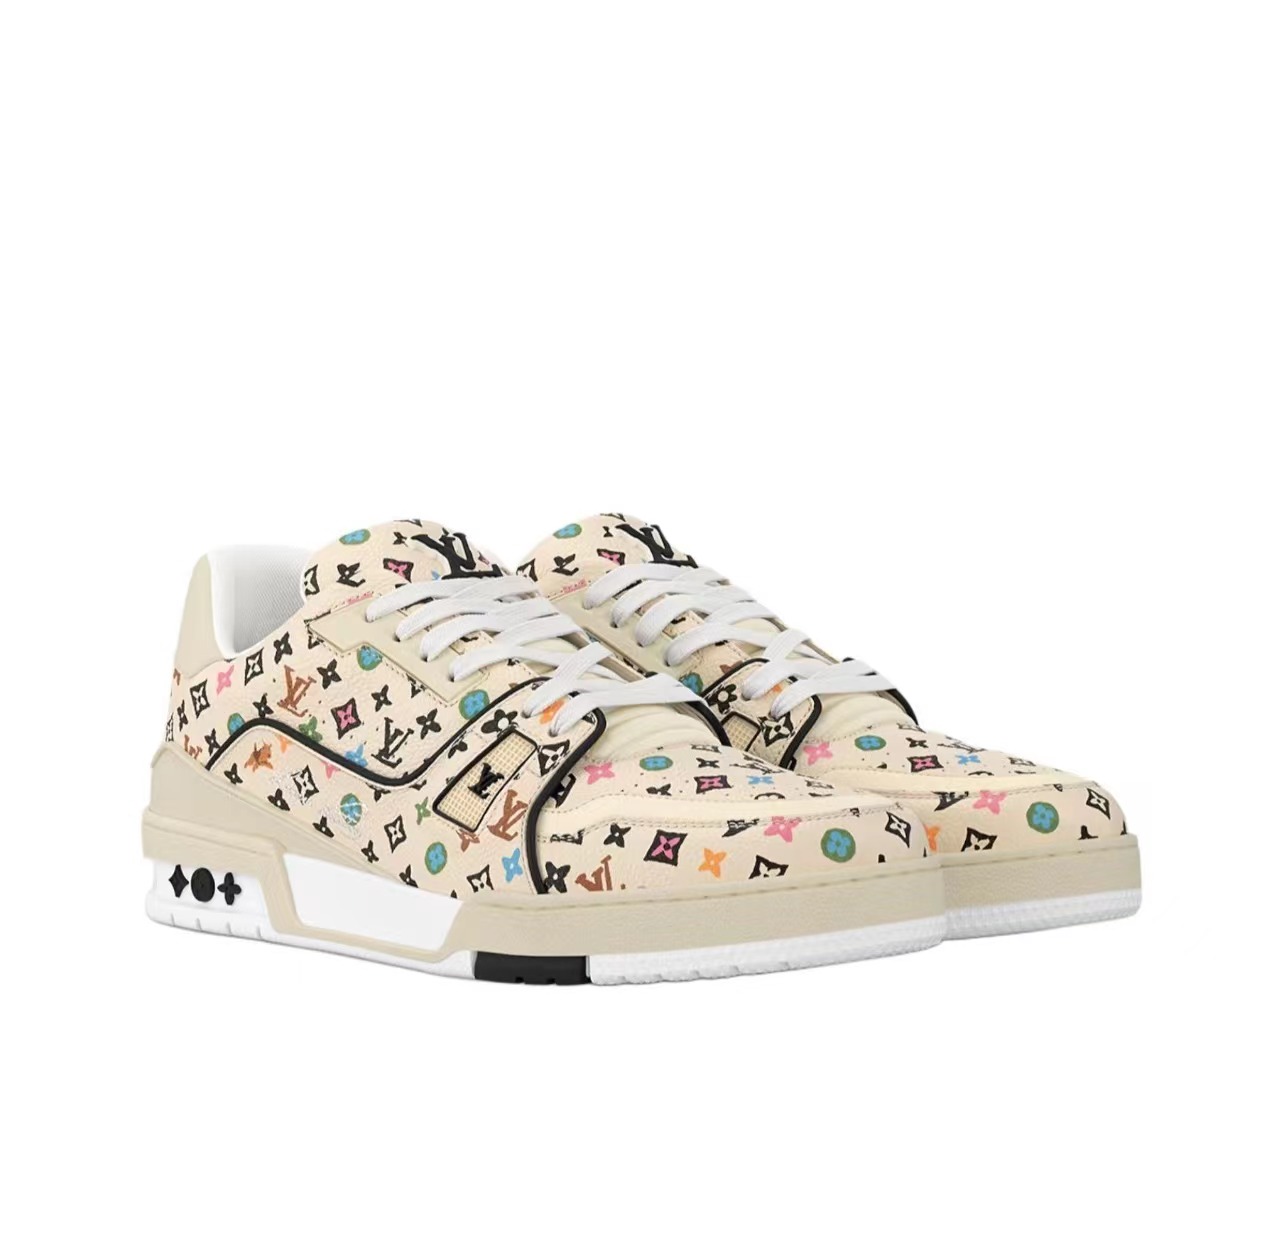 Louis Vuitton by Tyler, the Creator LV Trainer Beige